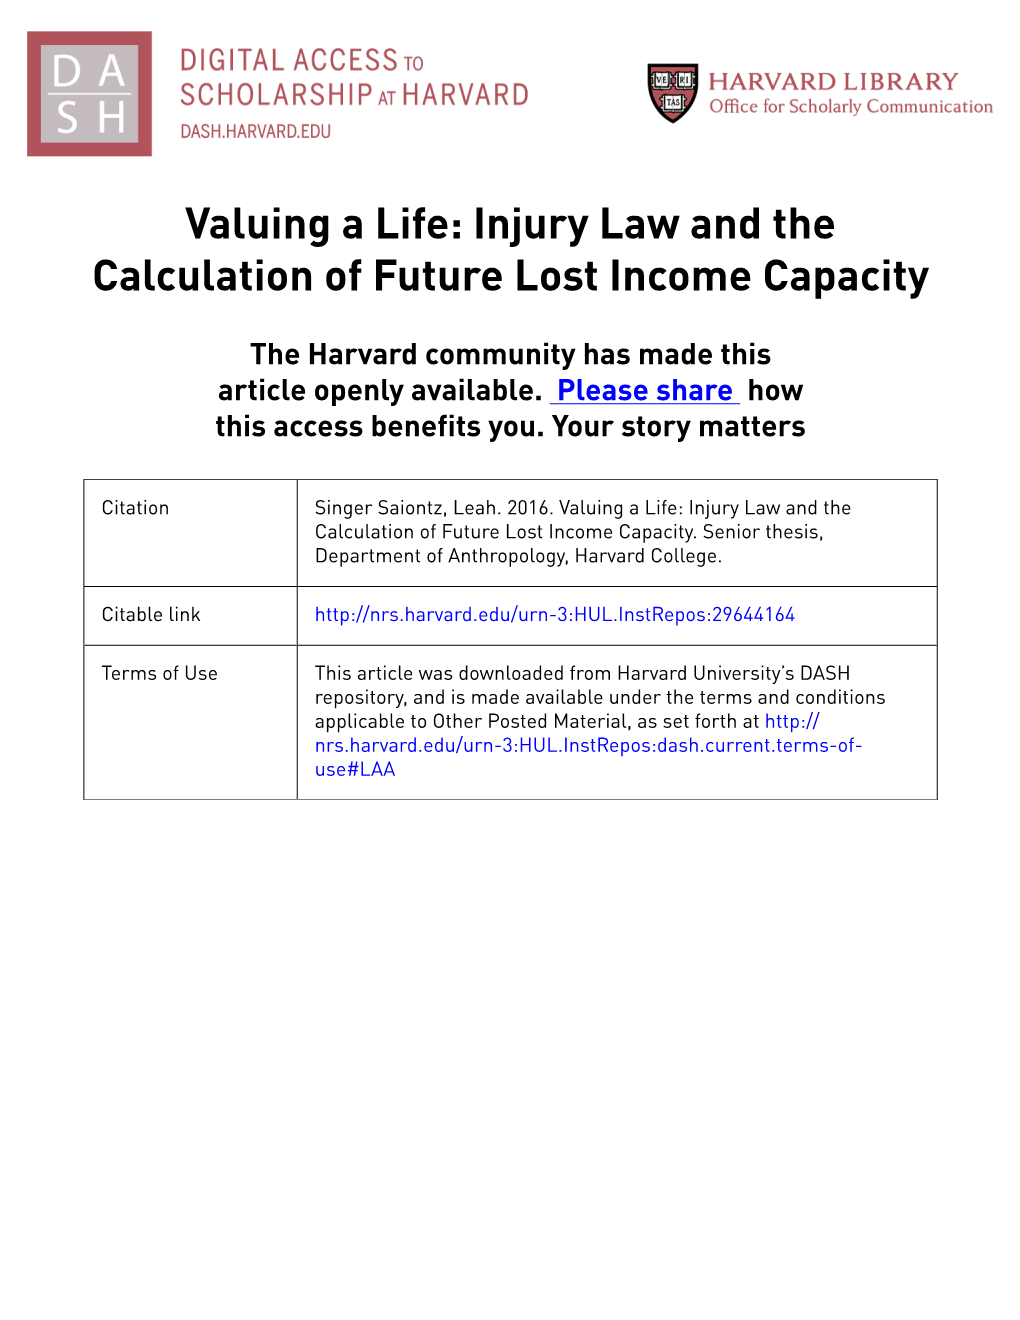 Injury Law and the Calculation of Future Lost Income Capacity